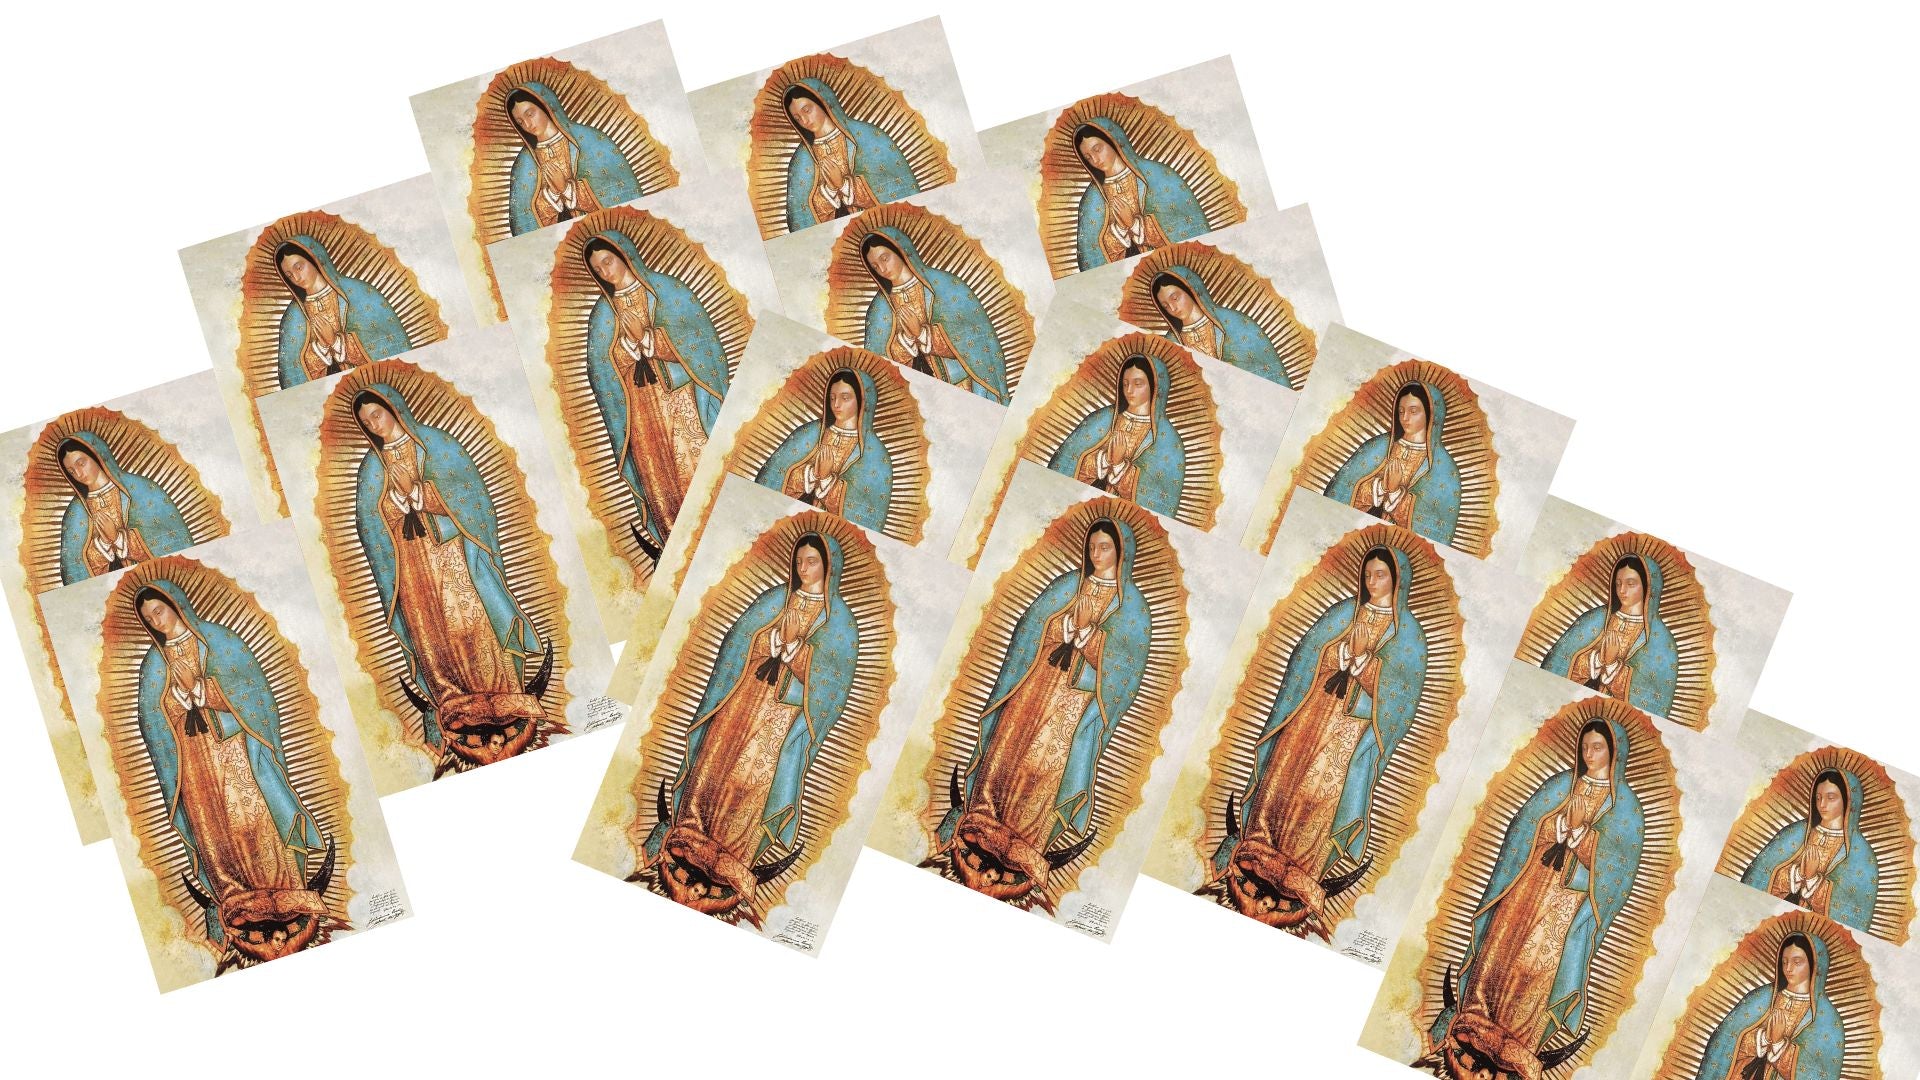 Our Lady of Guadalupe words to Juan Diego Prayer Card Packages - Bob and Penny Lord